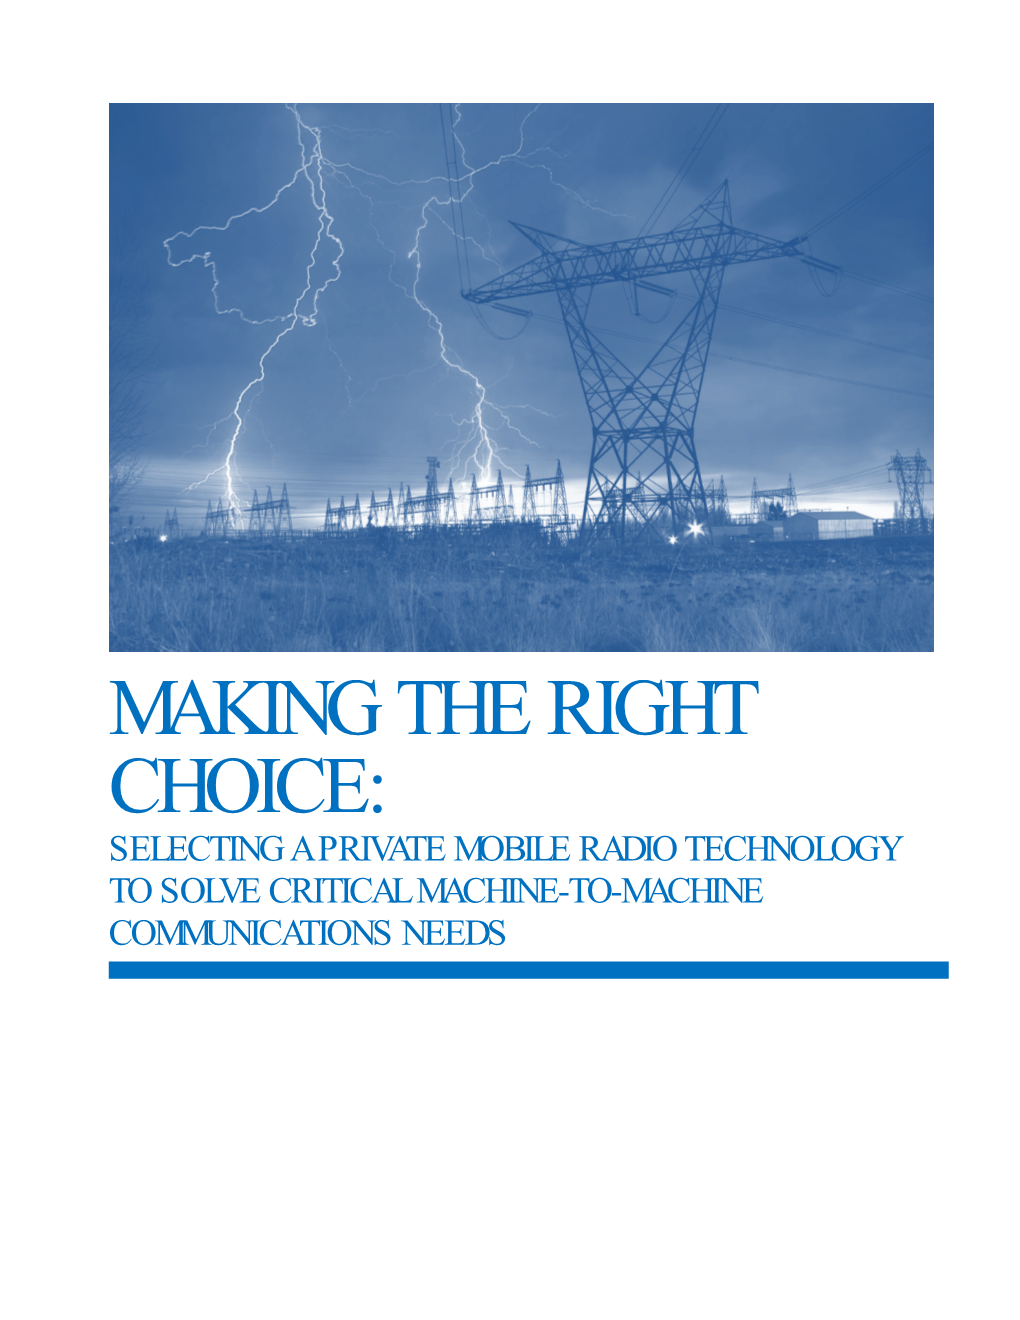 Making the Right Choice: Selecting a Private Mobile Radio Technology to Solve Critical Machine-To-Machine Communications Needs